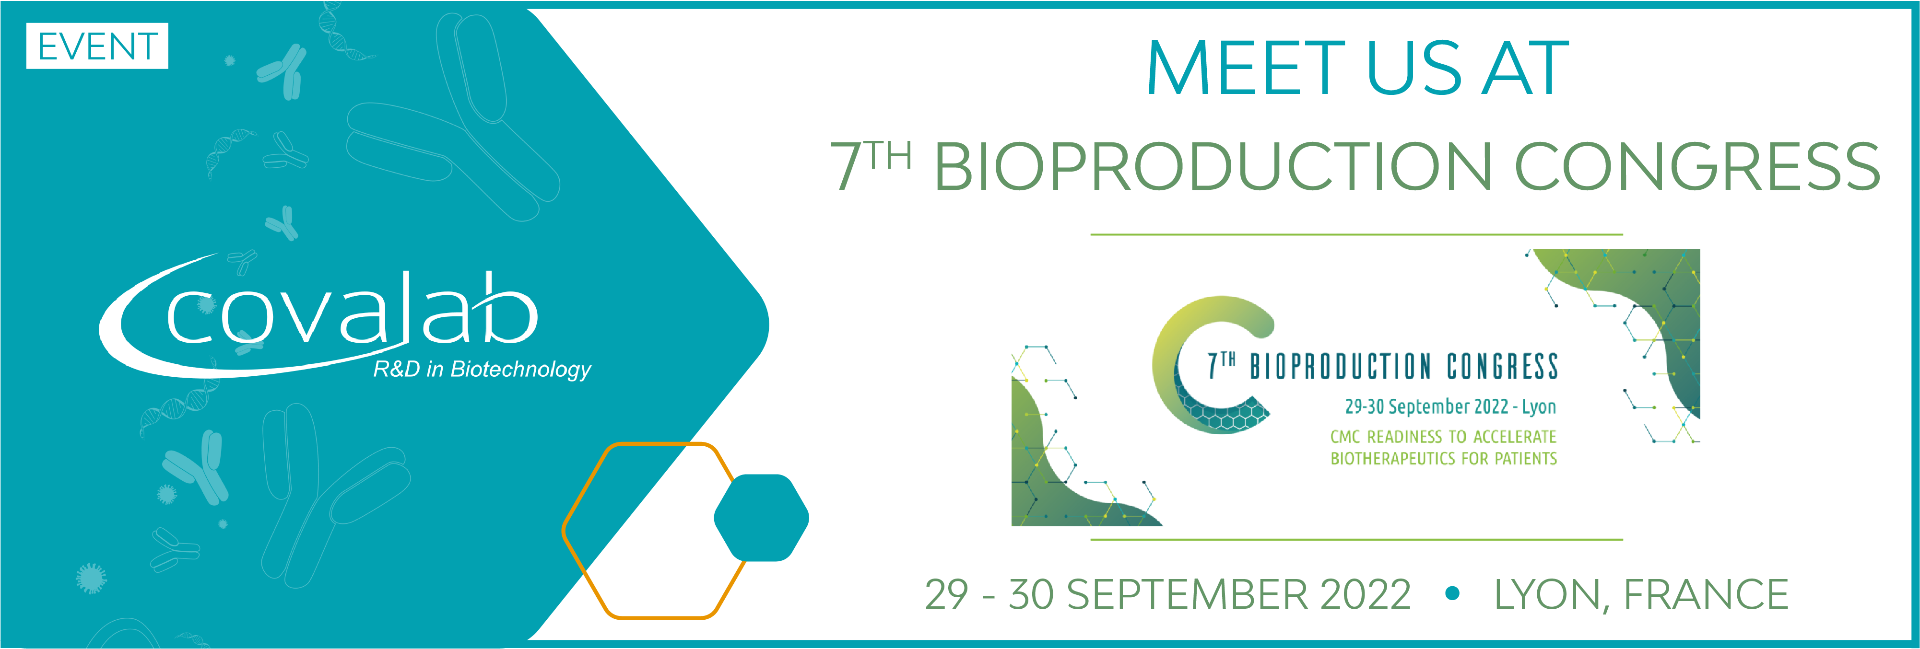 7th Bioproduction Congress